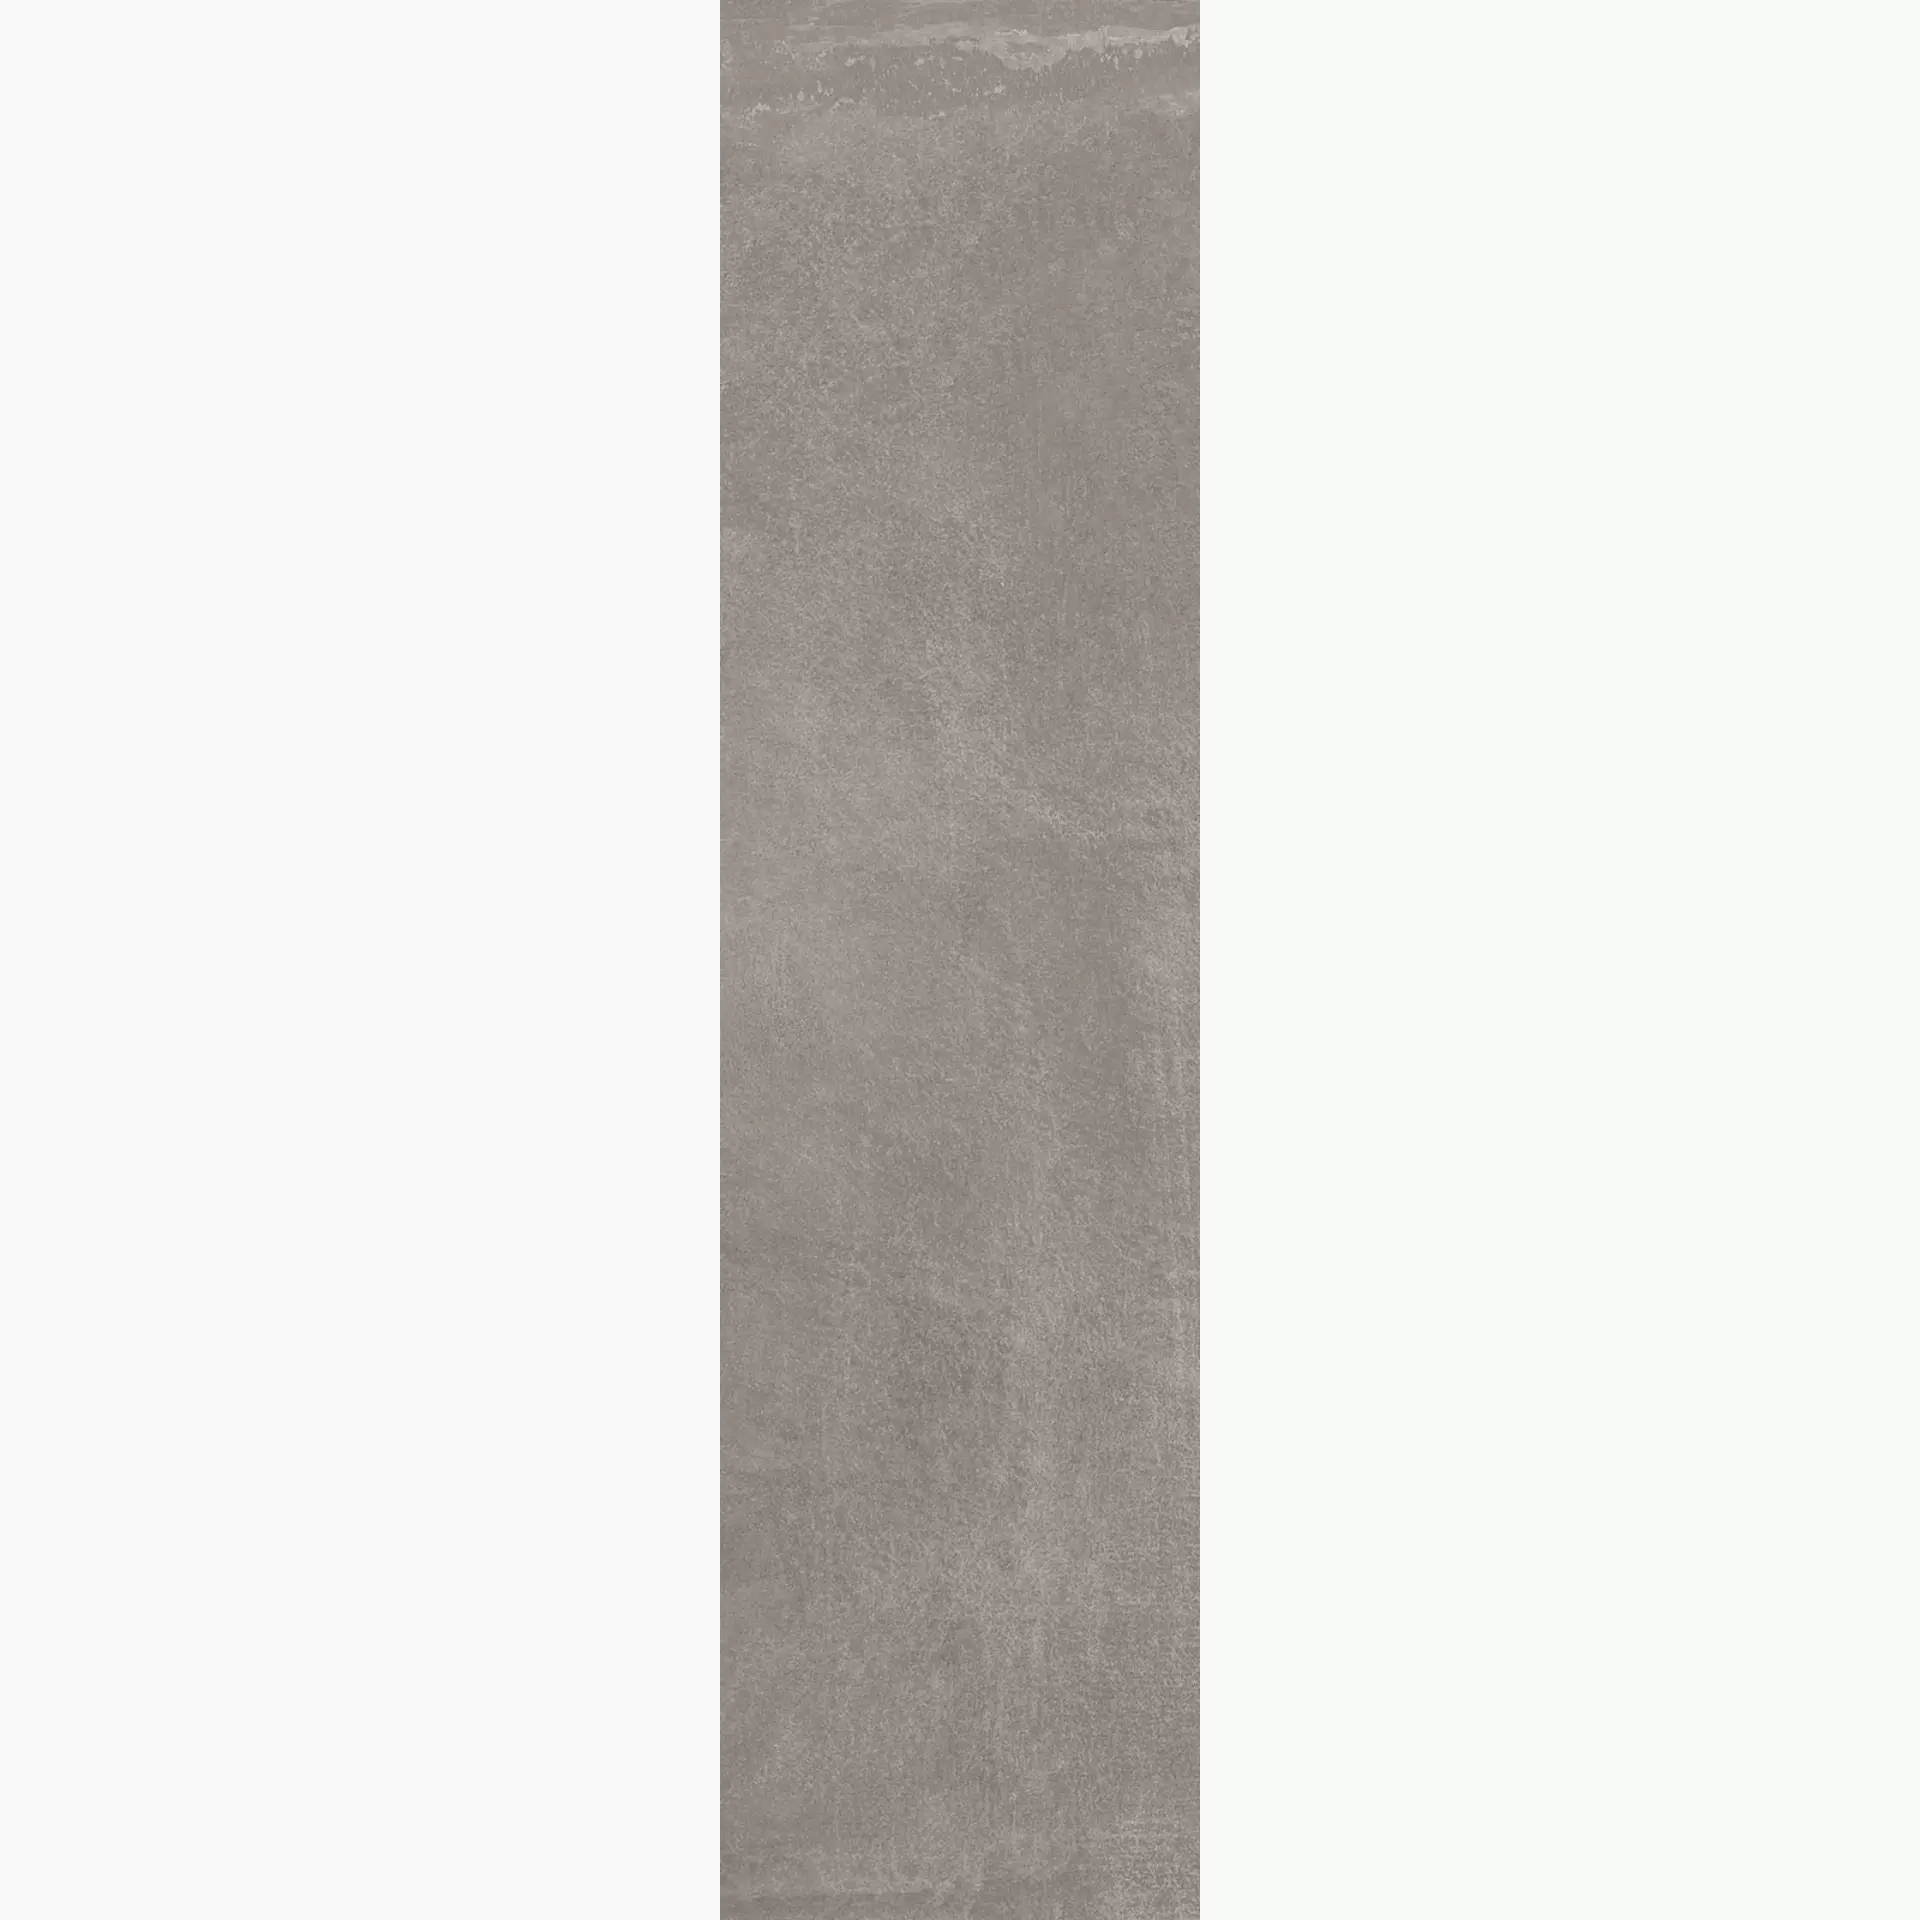 Keope Noord Taupe Naturale – Matt 45444532 30x120cm rectified 9mm